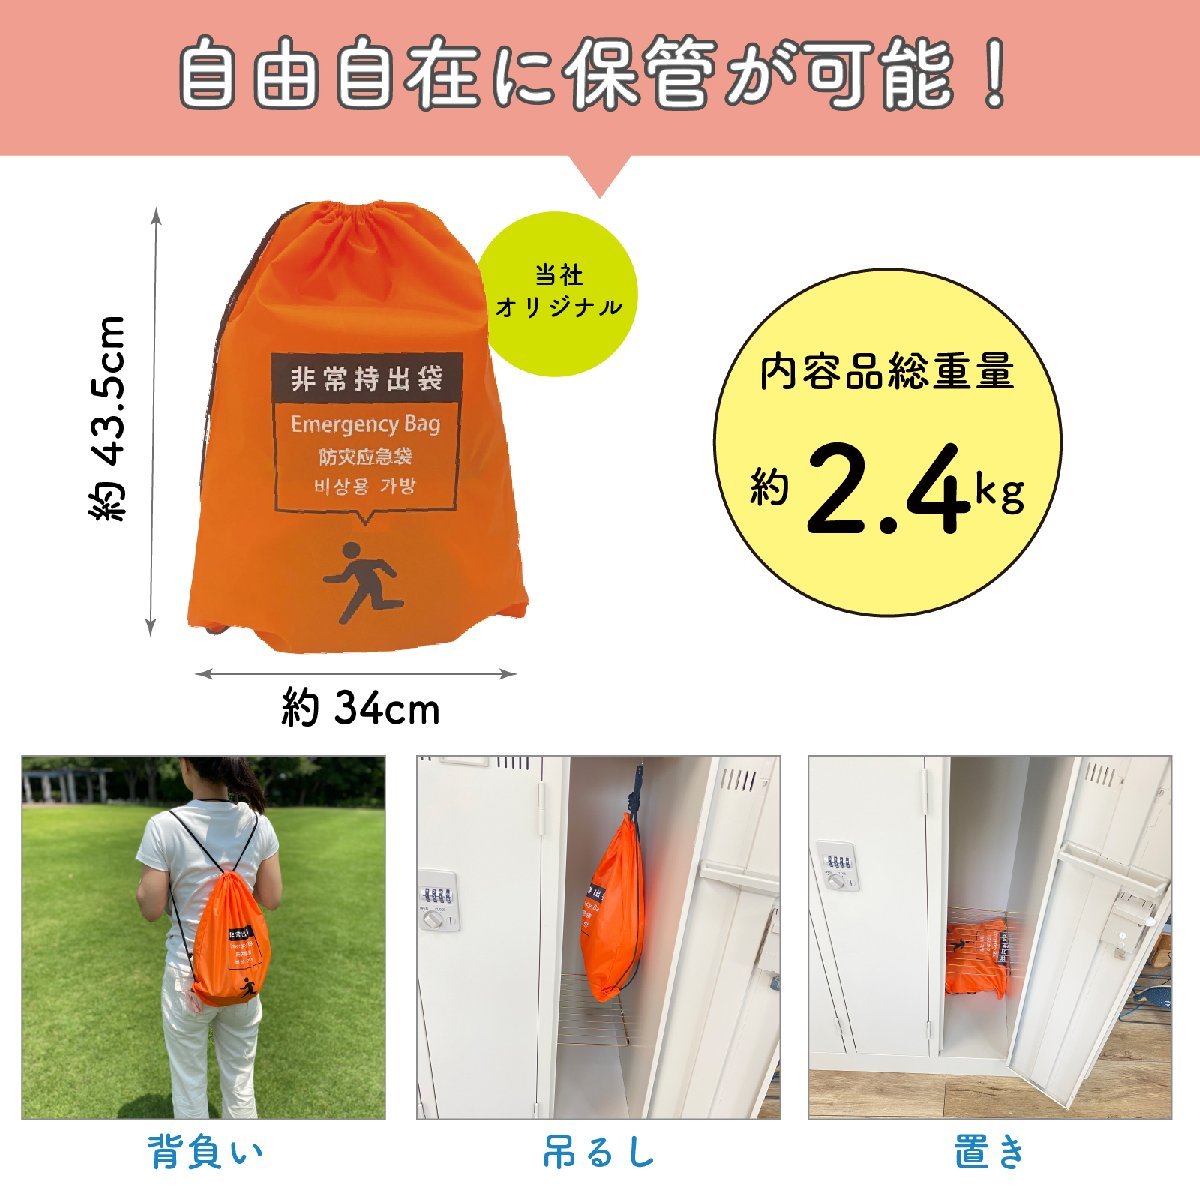 . middle . emergency place .BIG set [ disaster prevention ...] adult number high capacity . middle . measures kit emergency place . manual cooling material ... plastic case sport site 